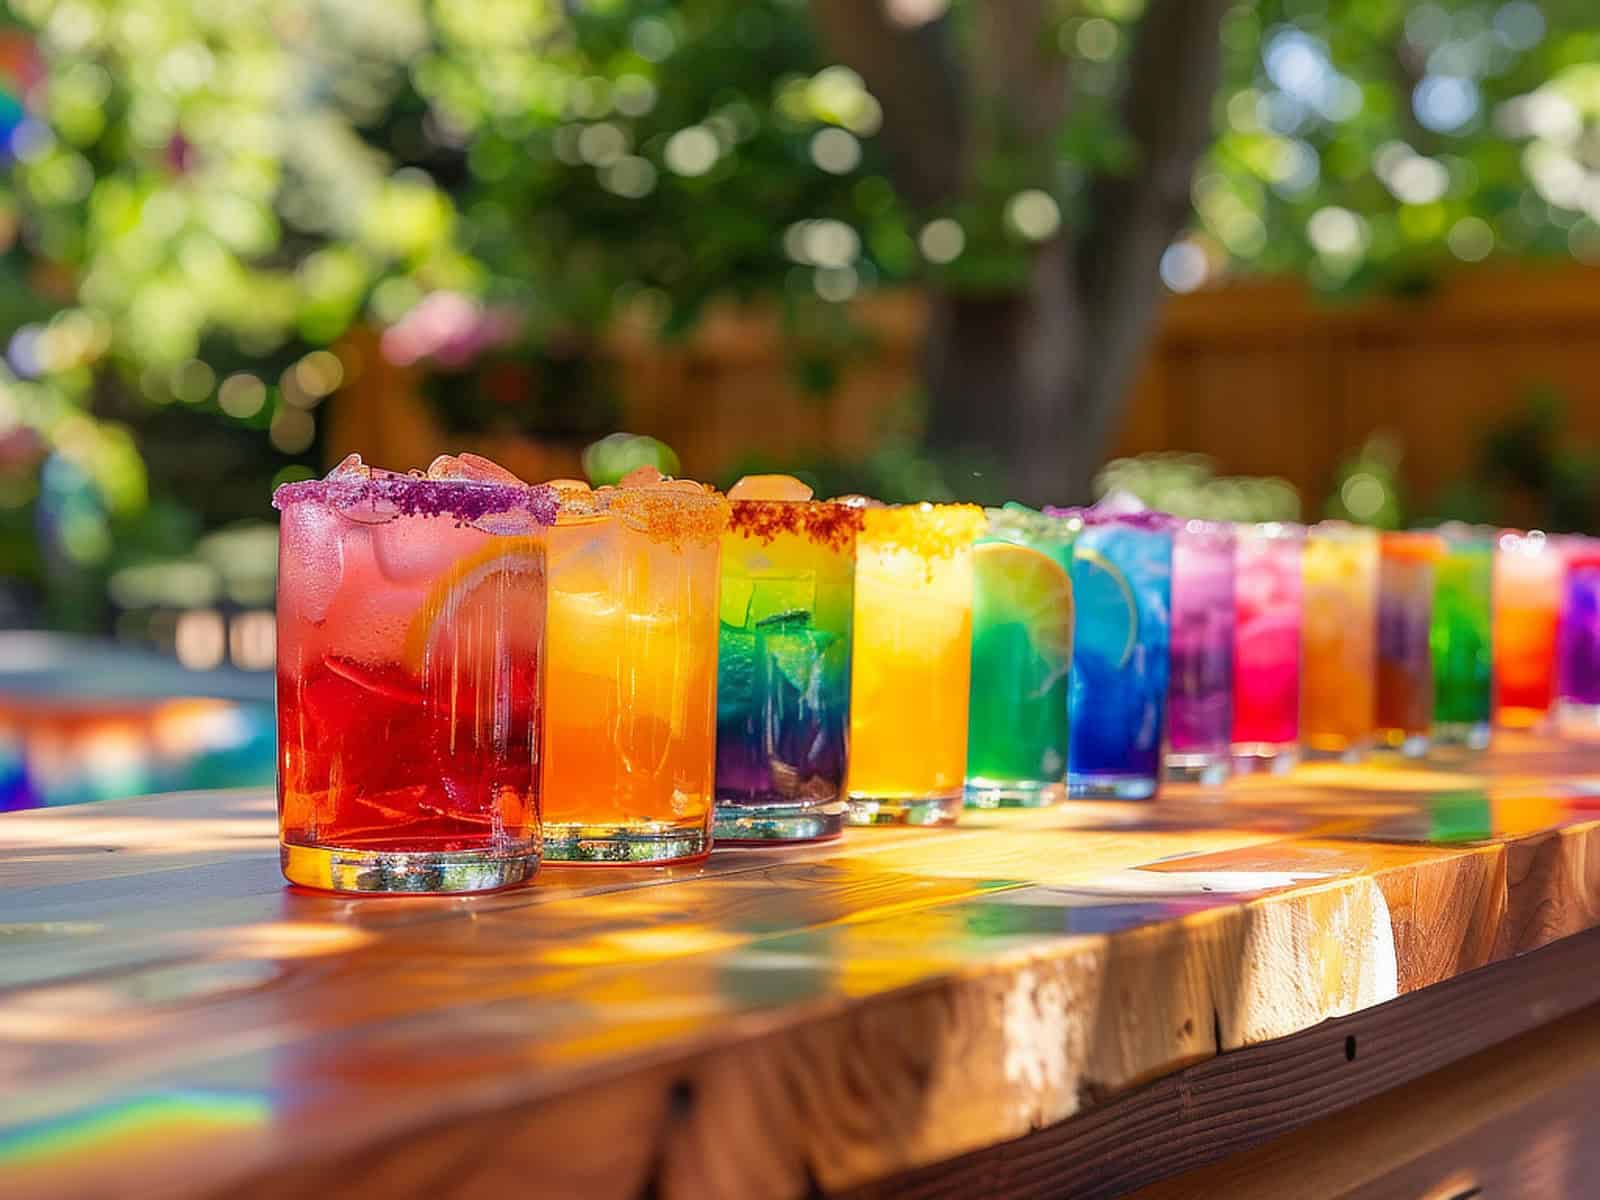 Cocktails in many colors lined up on a table outdoors